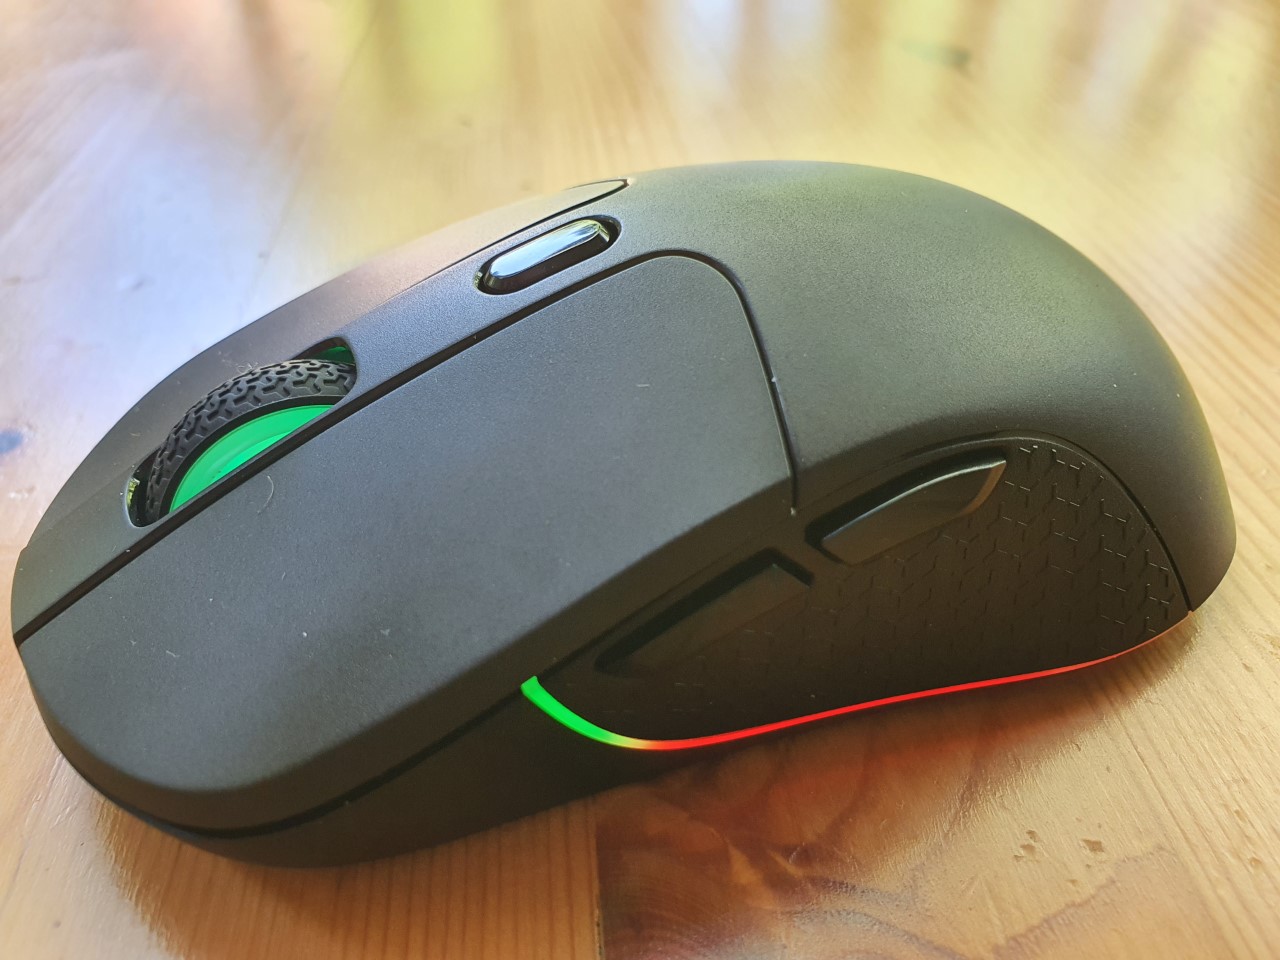 Keychron M3 - Best budget wireless mouse for gaming 